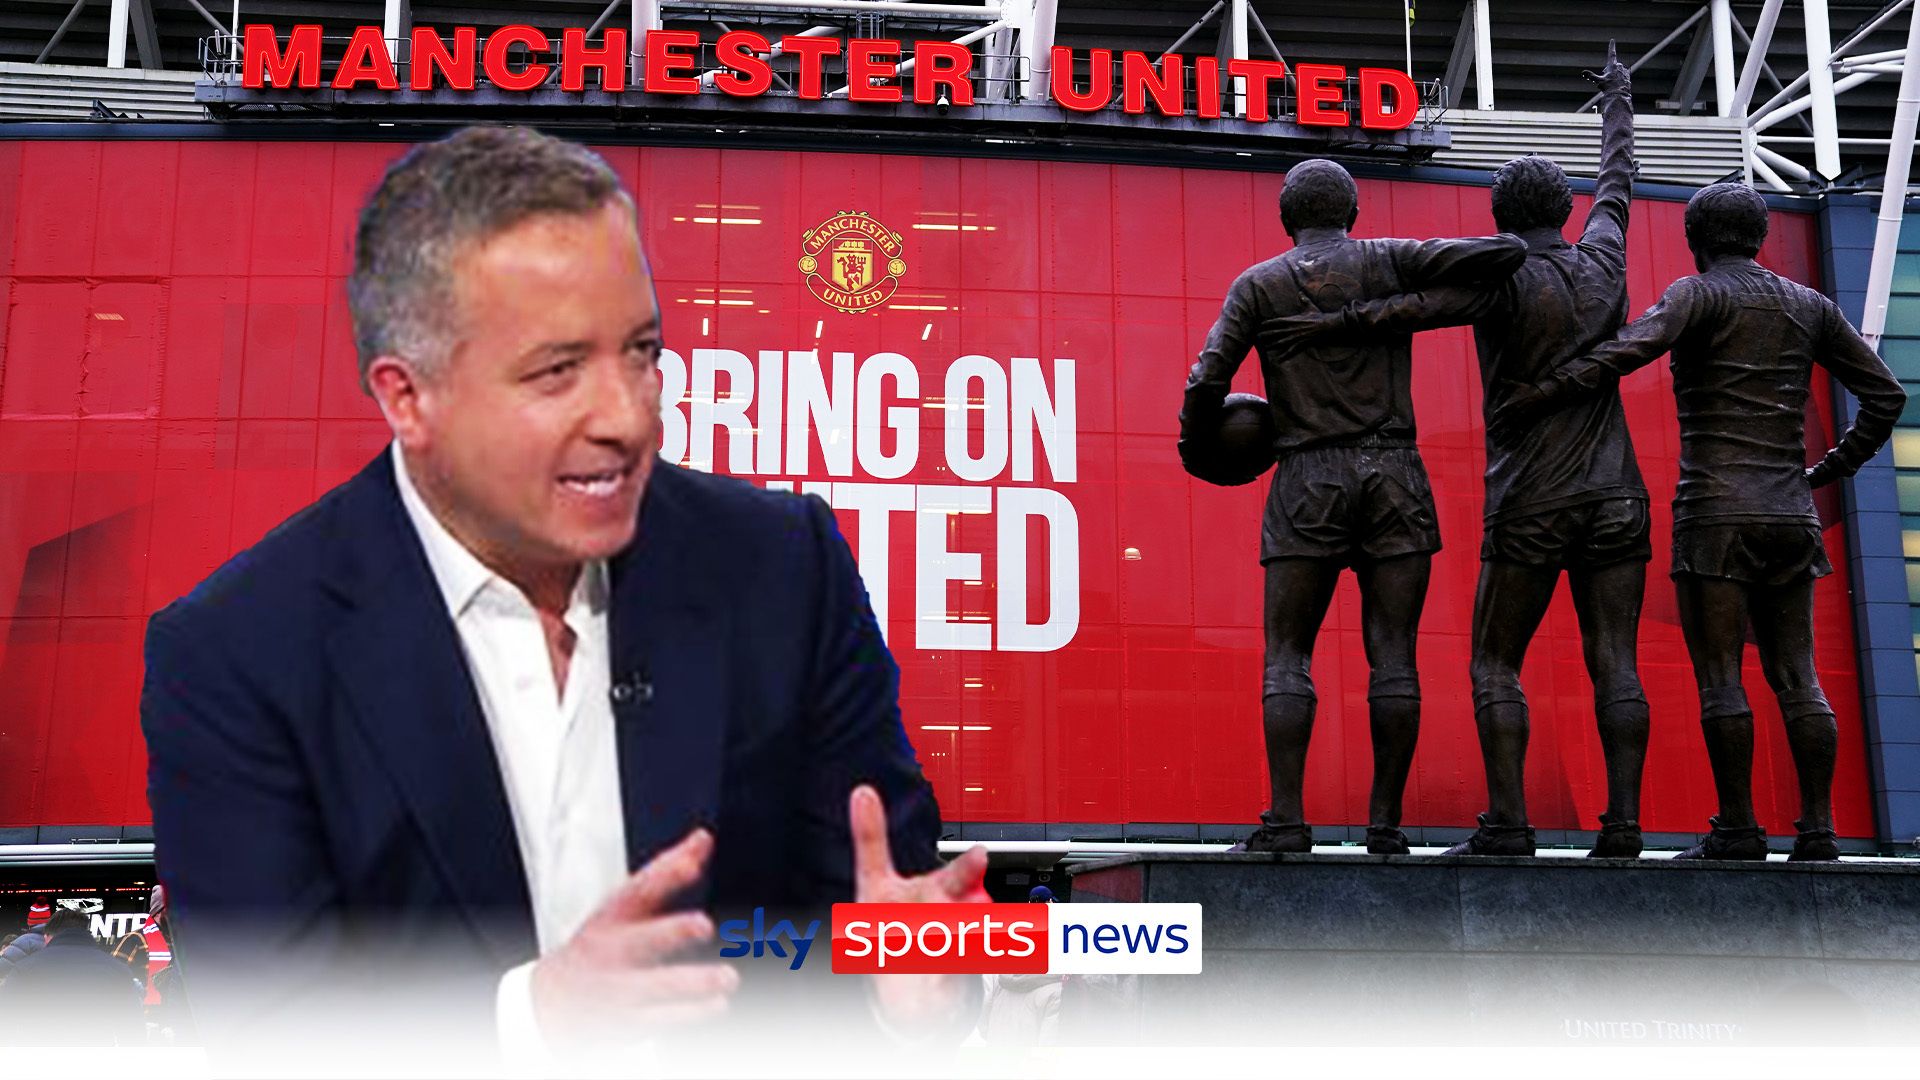 Man Utd takeover | 'Ratcliffe still very much in the hunt'